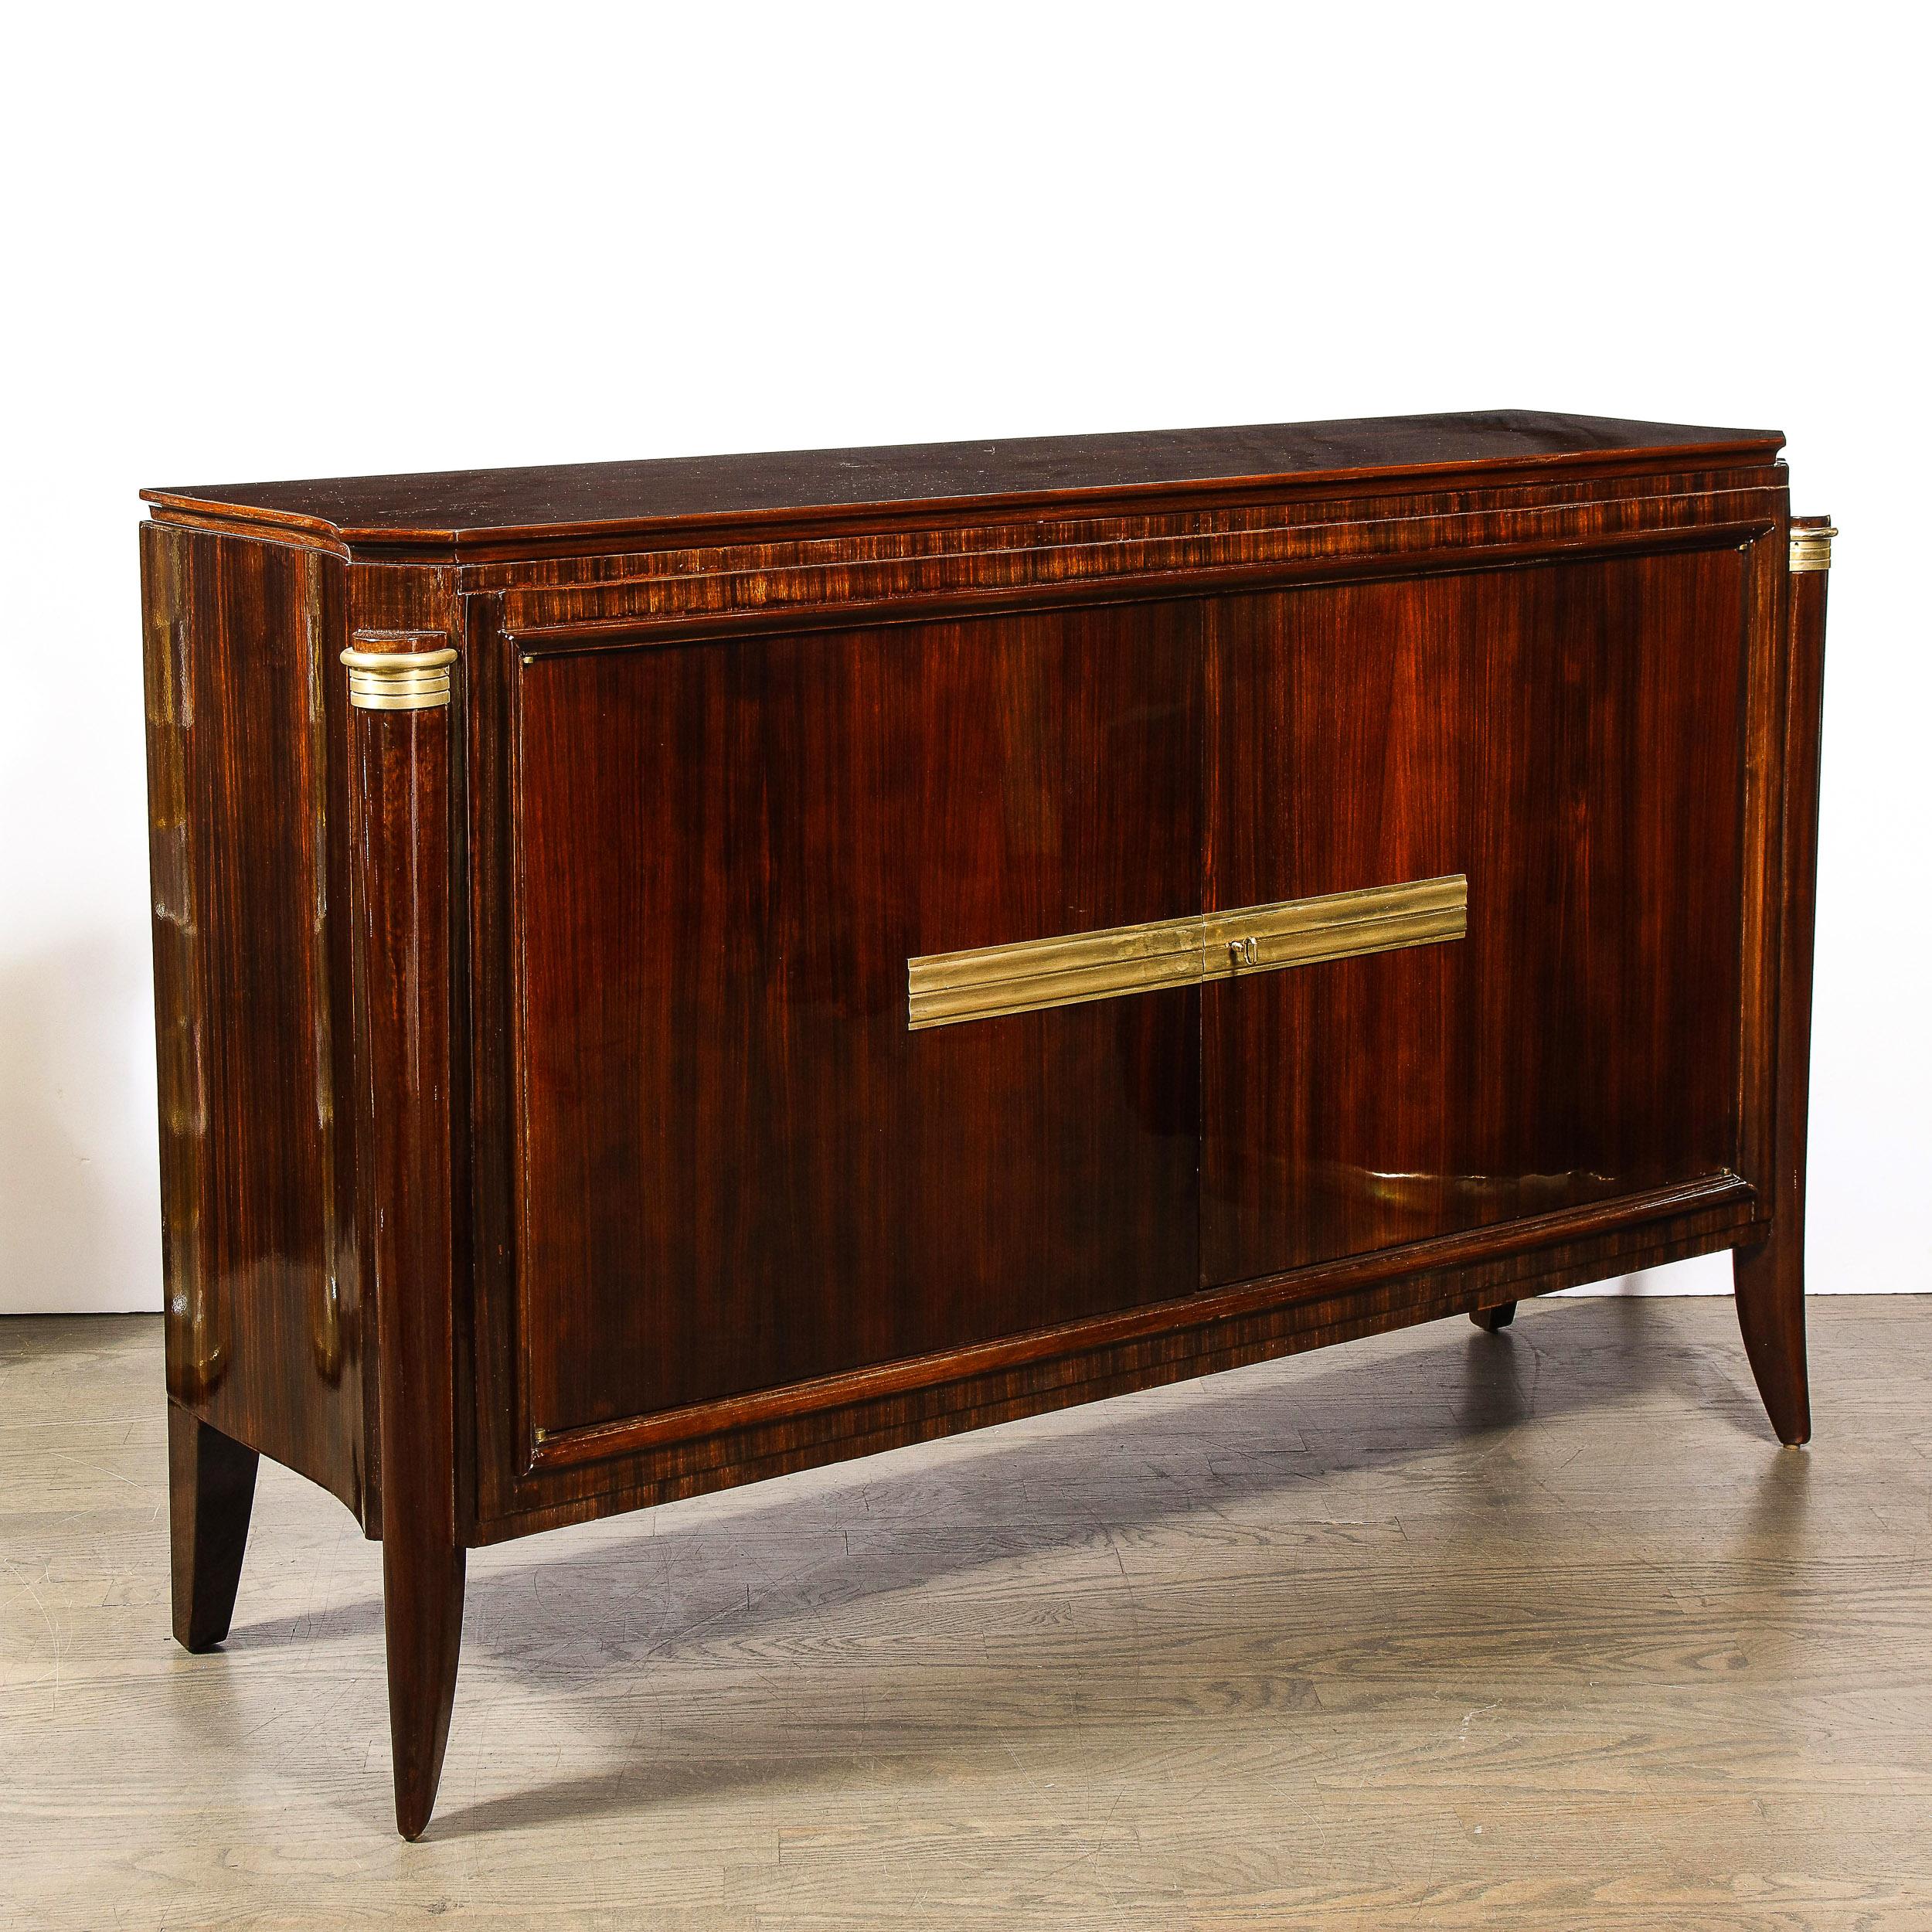 1940s Art Deco Directoire Style Bookmatched Walnut Sideboard w/ Bronzed Fittings 4